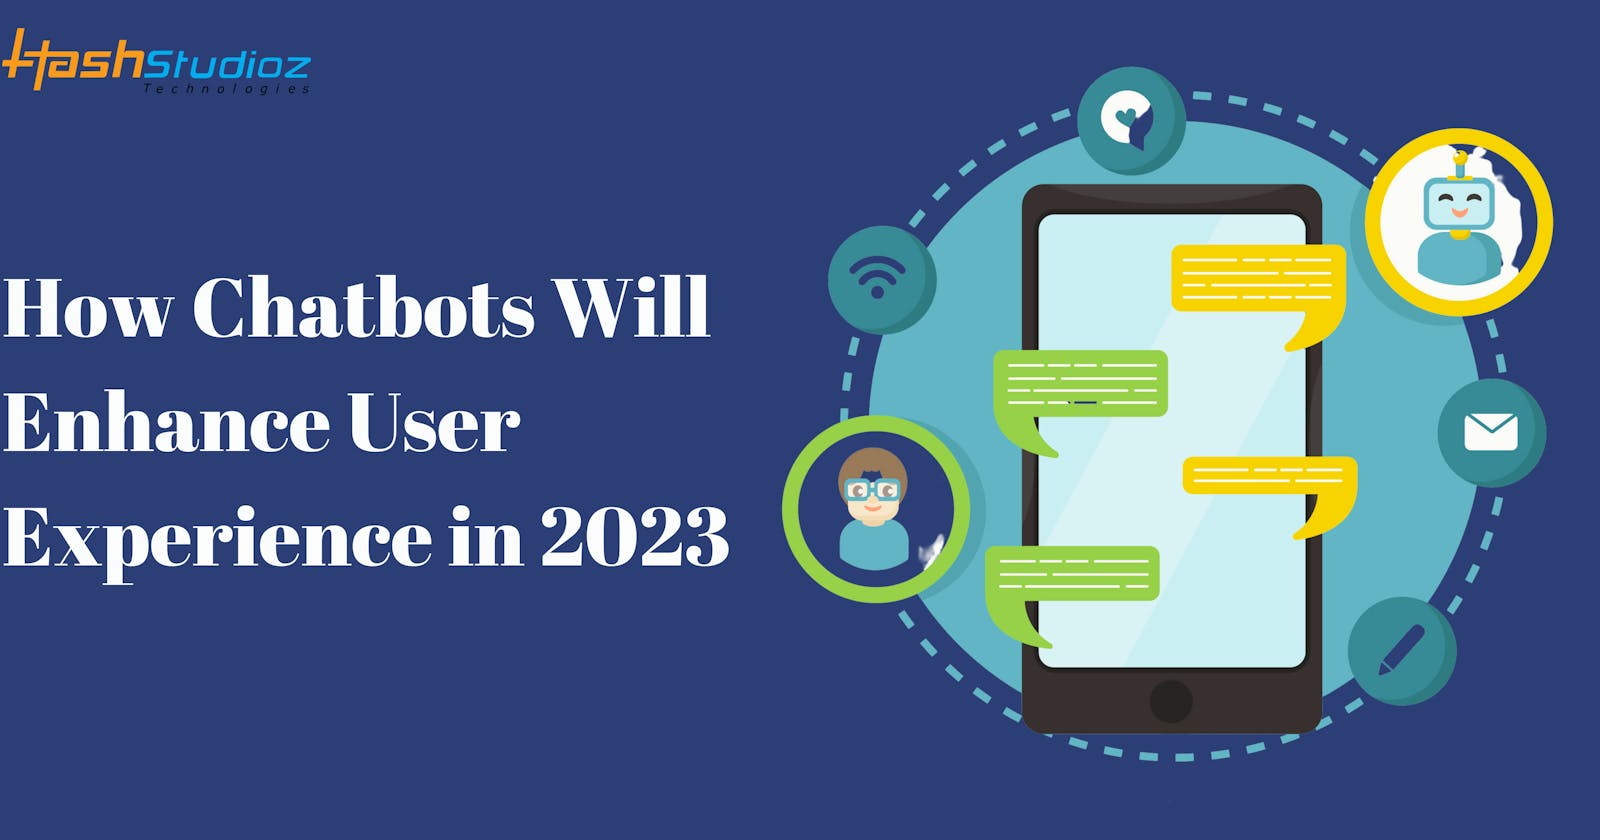 How Chatbots Will Enhance User Experience in 2023